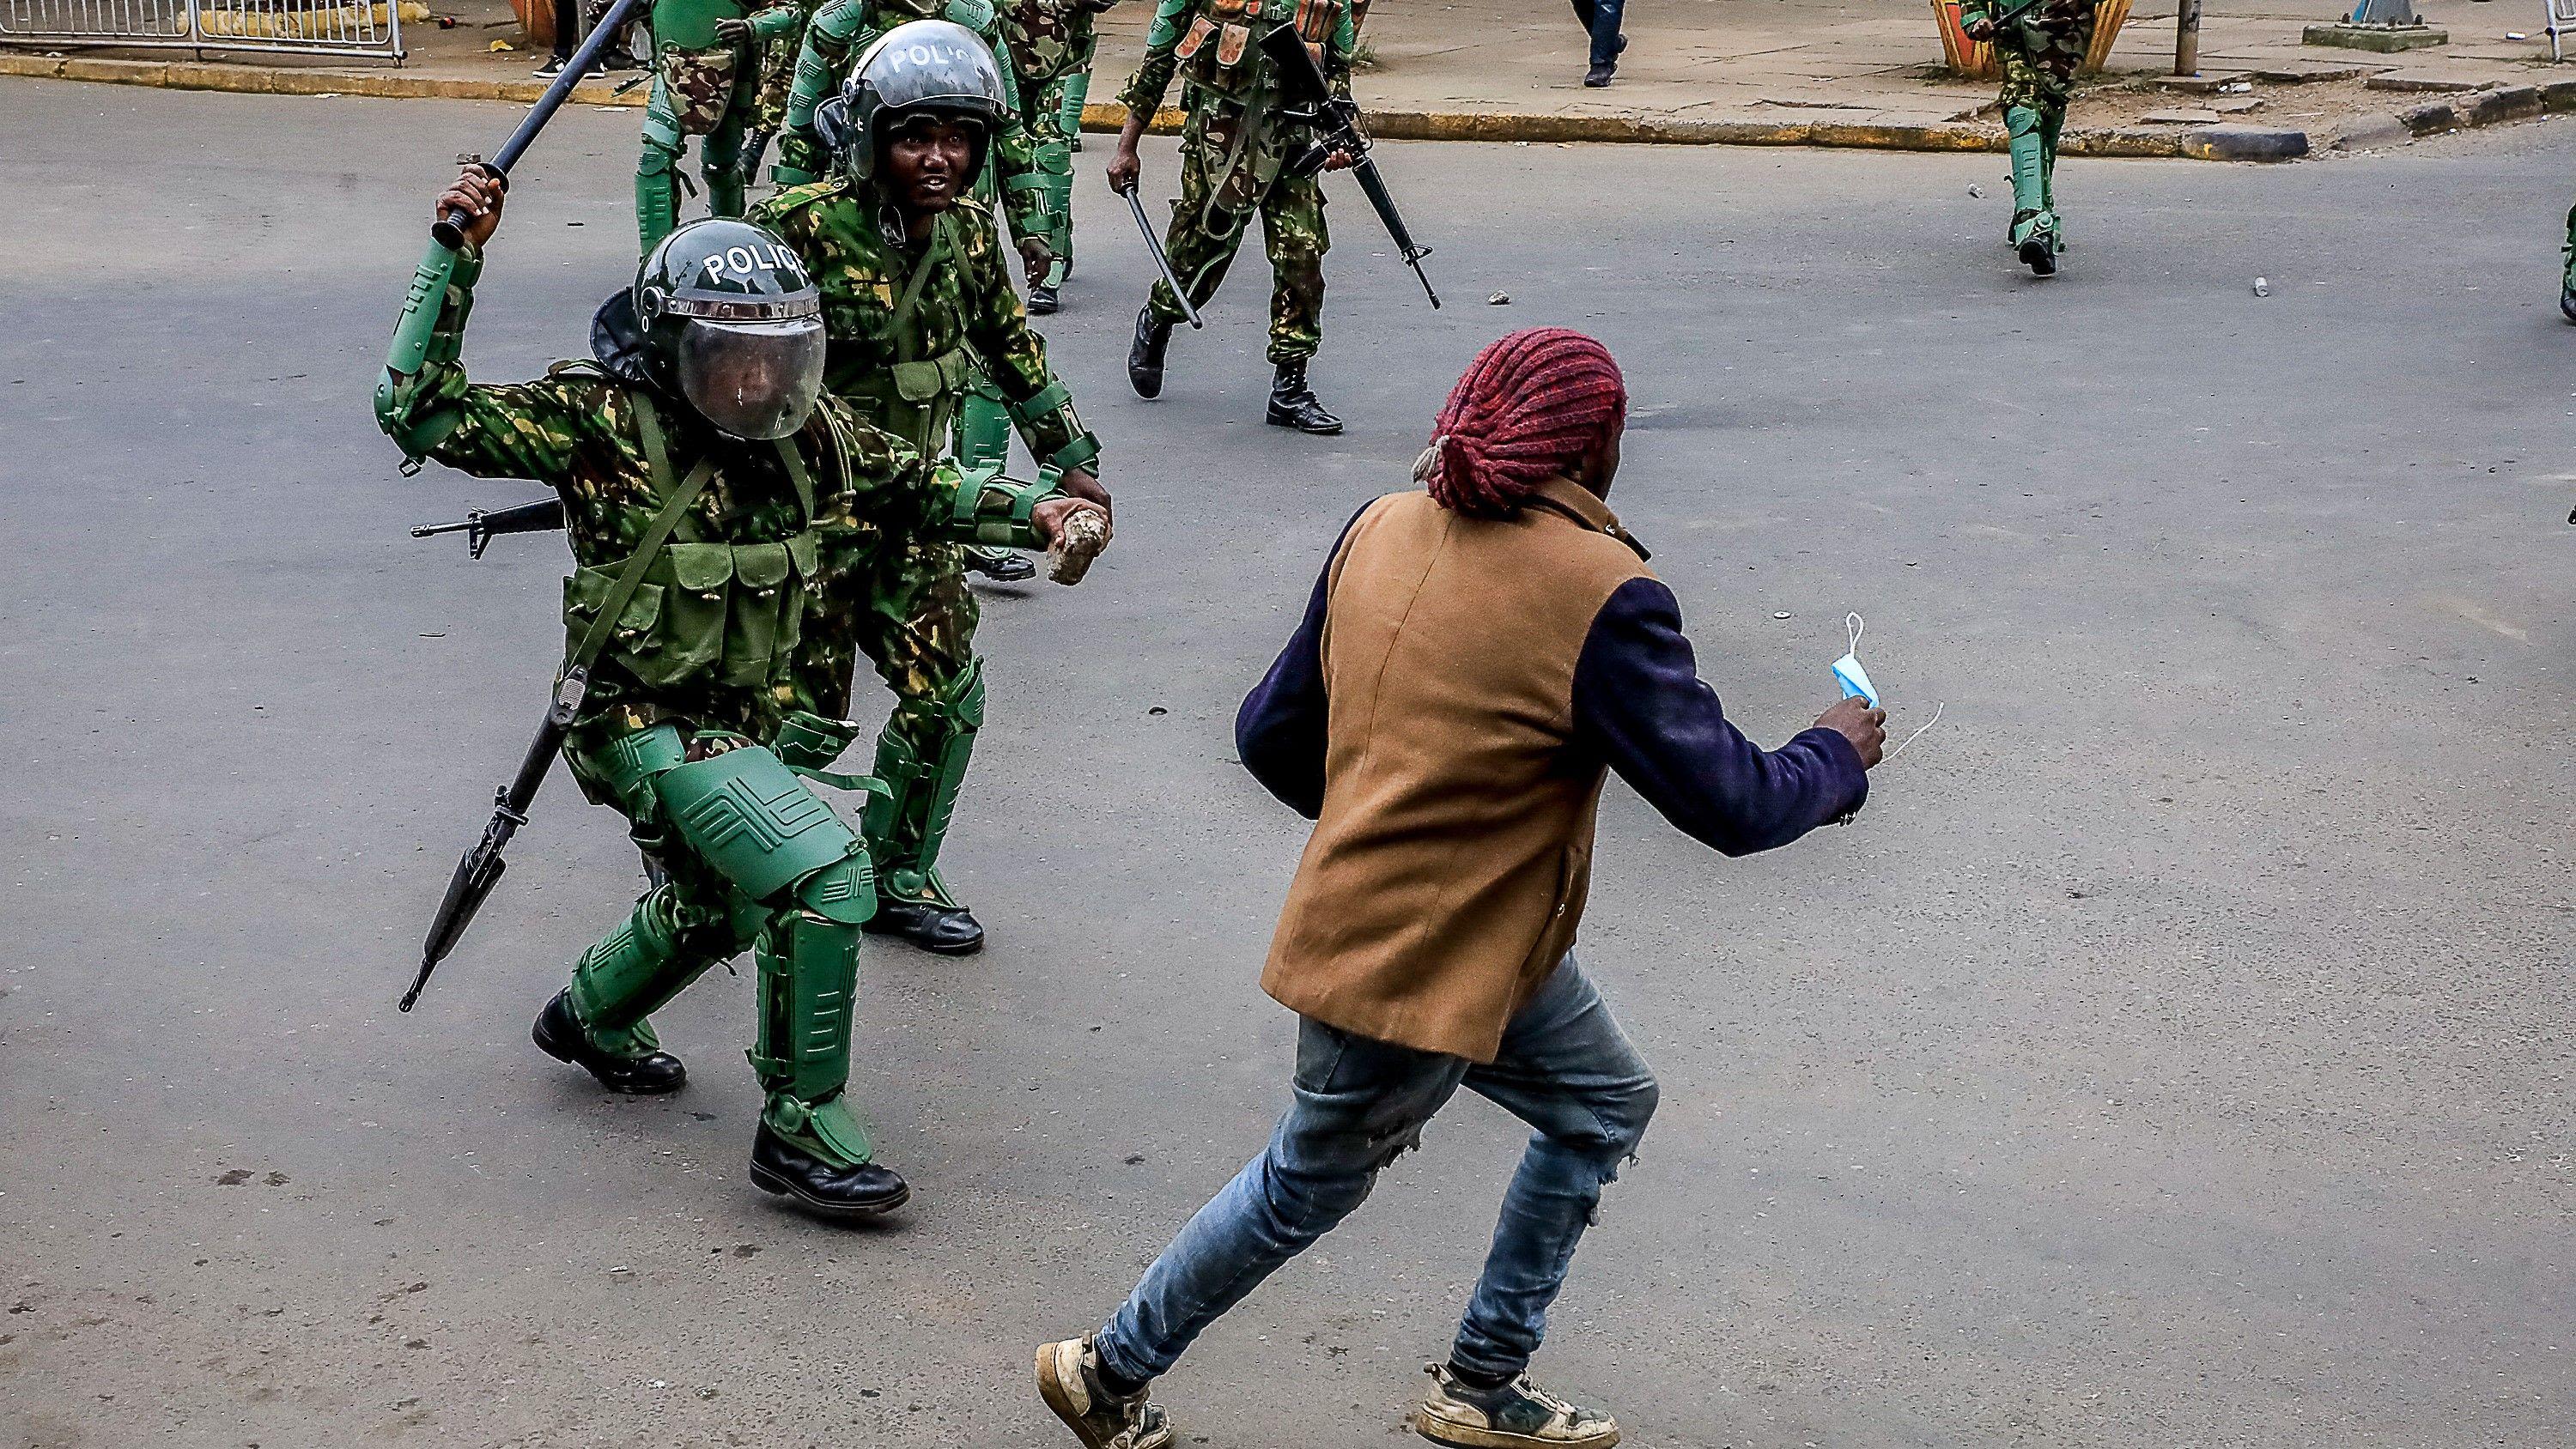 Kenyan court suspends police ban on protests